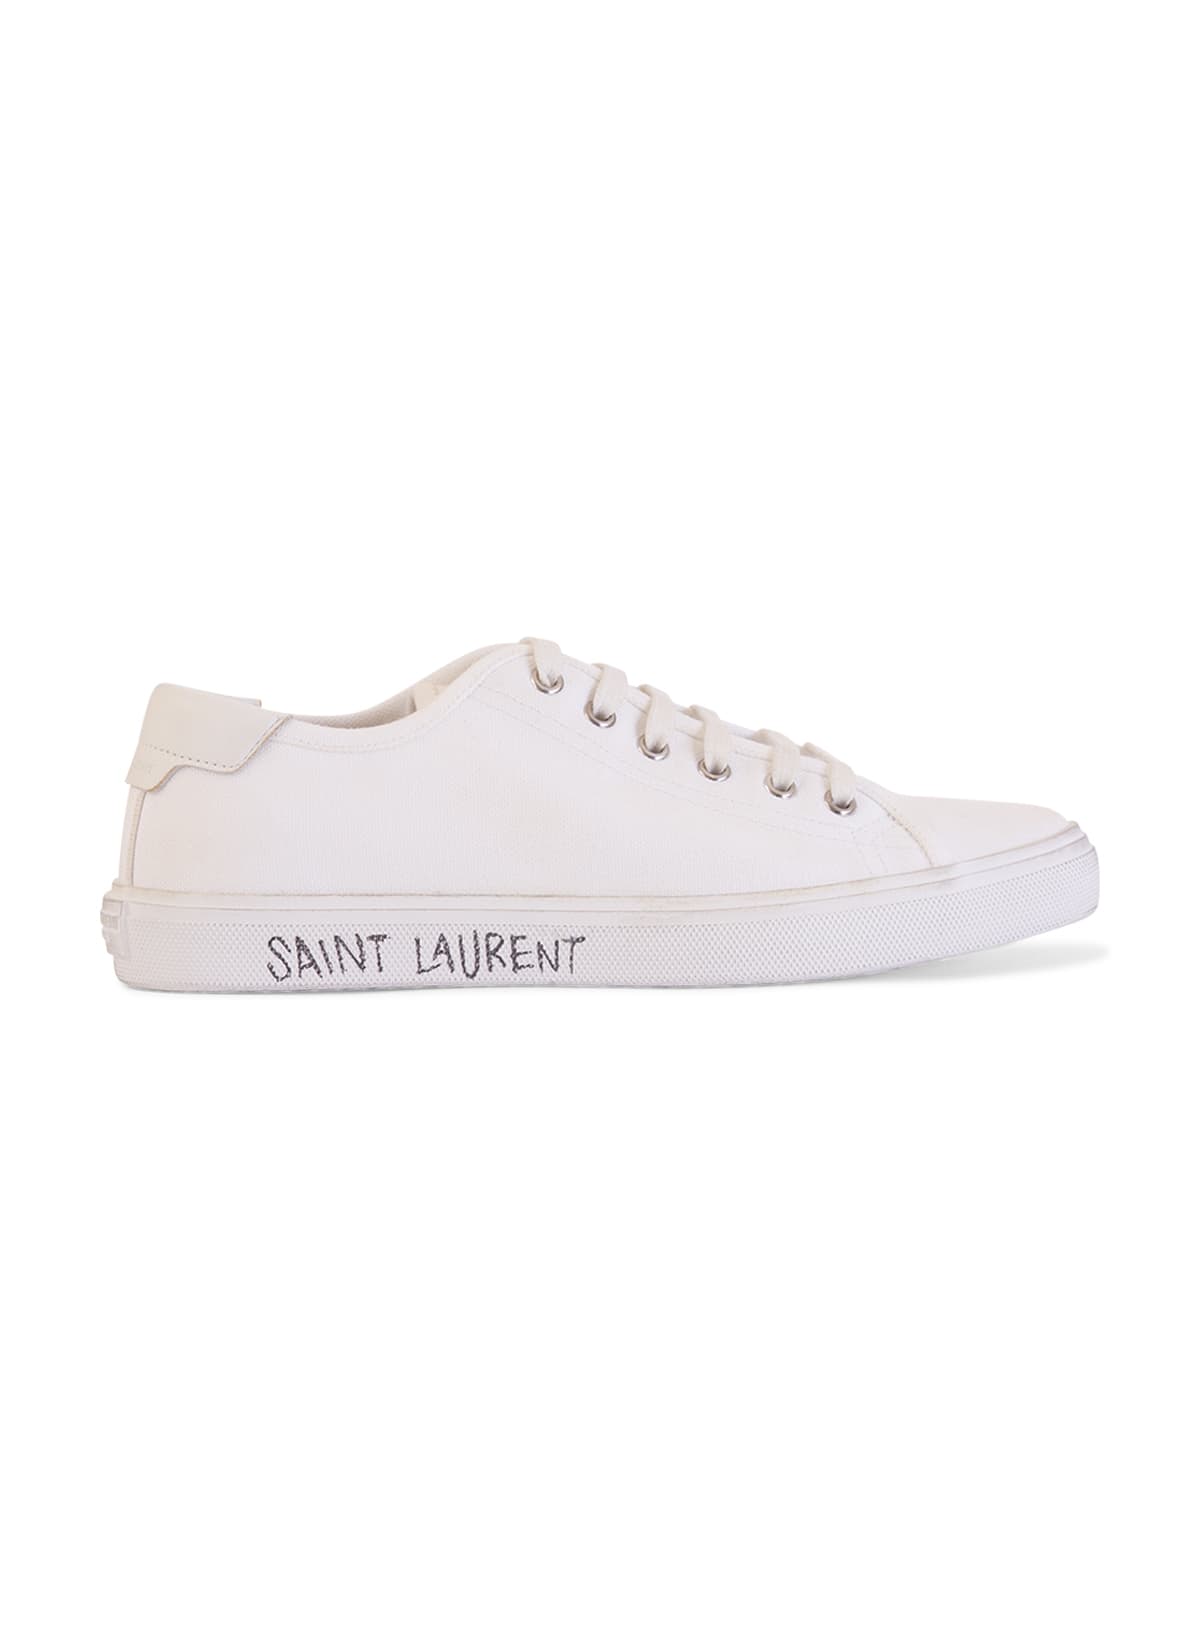 Saint Laurent Malibu Sneakers In Canvas And Leather